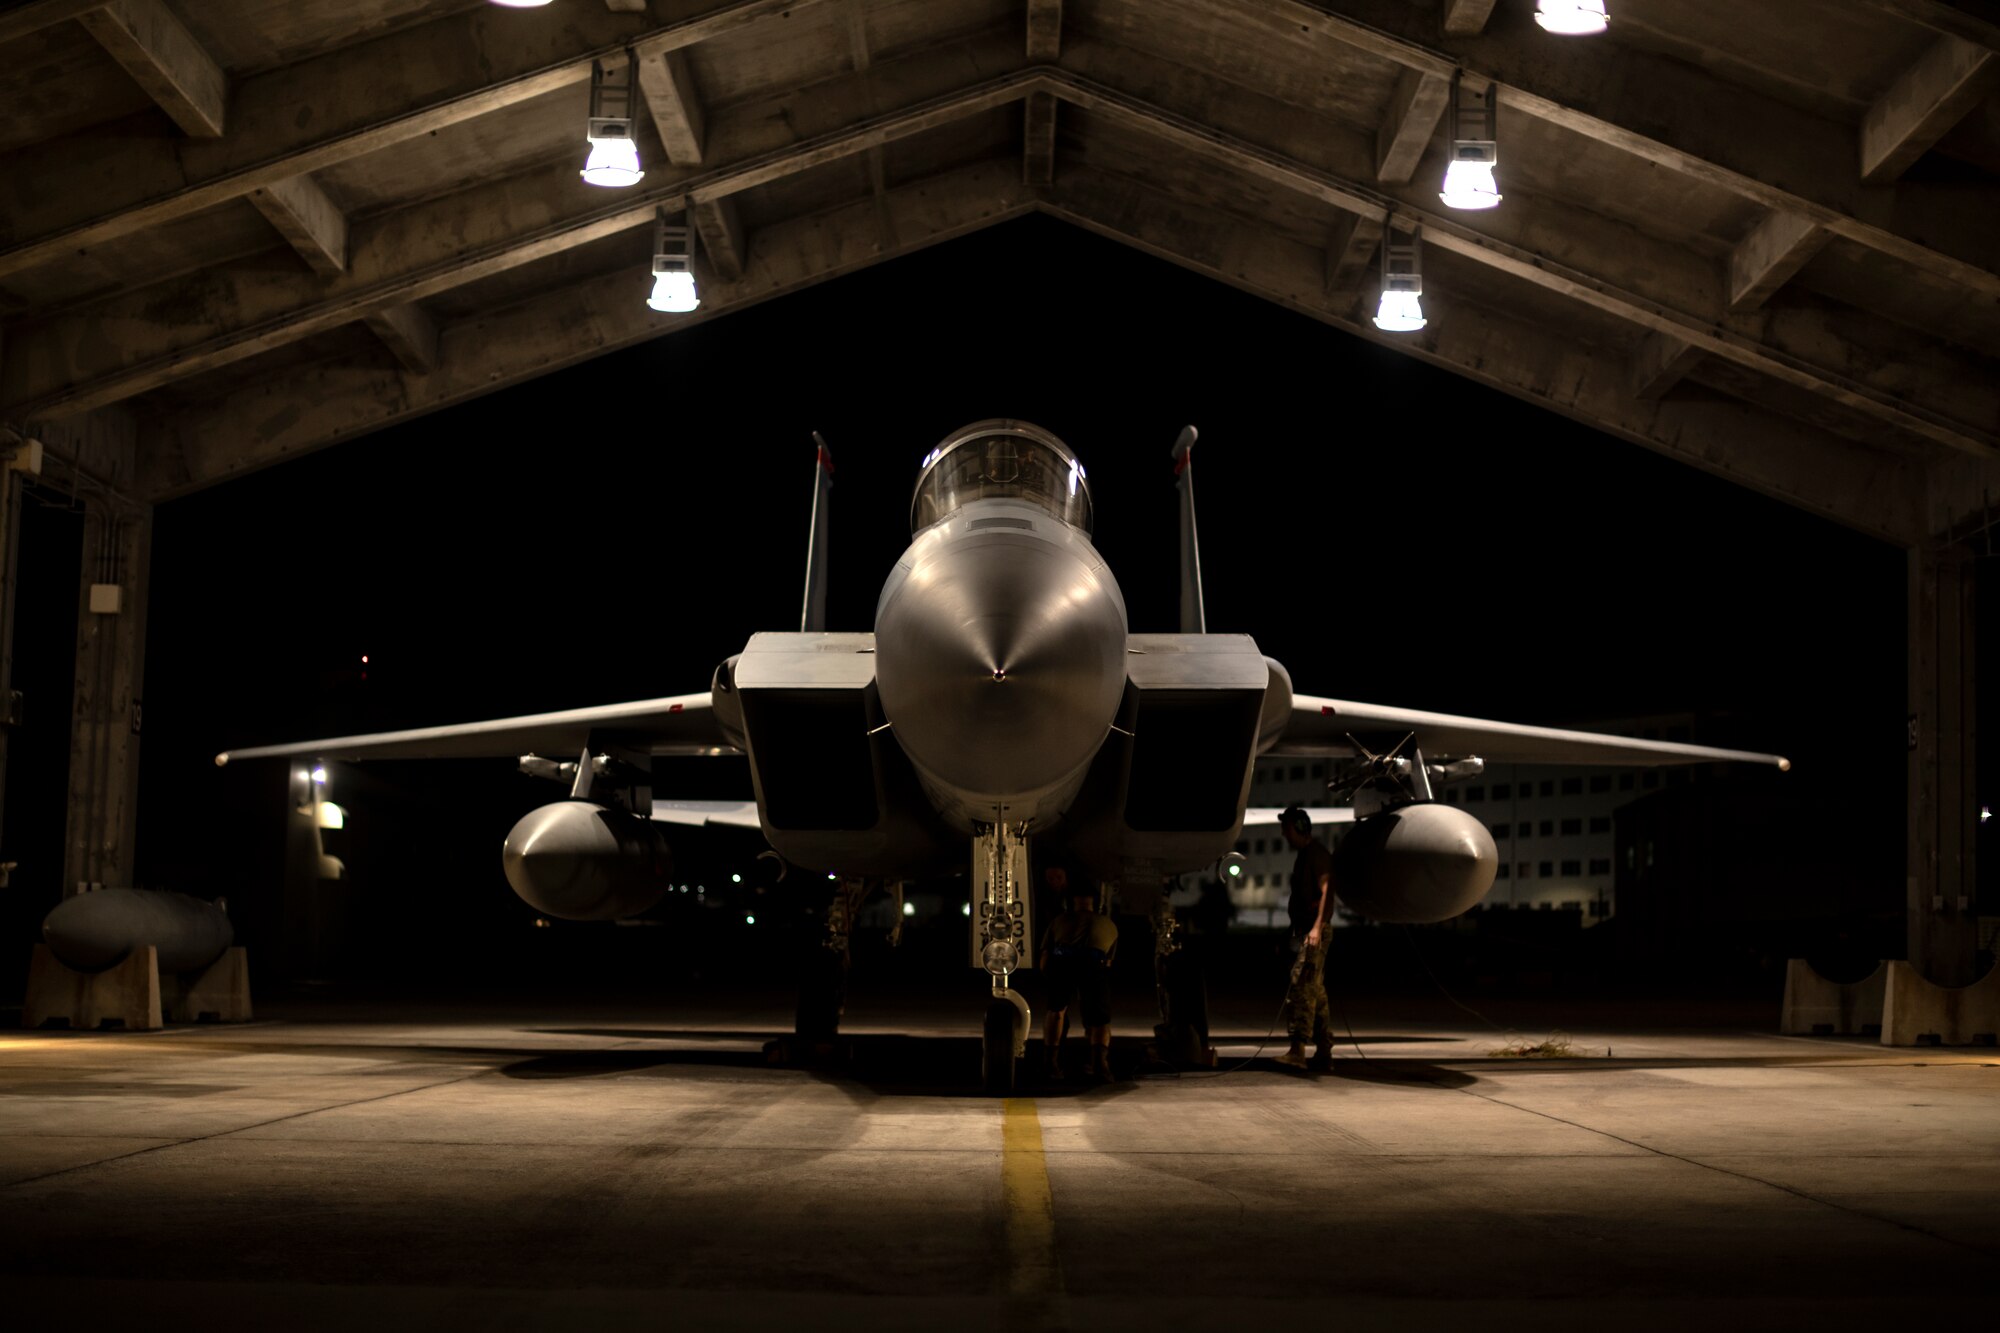 A U.S. Air Force F-15C Eagle assigned to the 44th Fighter Squadron sits on the flightline after returning from a training sortie in support of Exercise Southern Beach at Kadena Air Base, Japan, Oct. 28, 2021. Southern Beach is a continual effort to enhance interoperability between U.S. Forces and host nation partners. (U.S. Air Force photo by Senior Airman Jessi Monte)